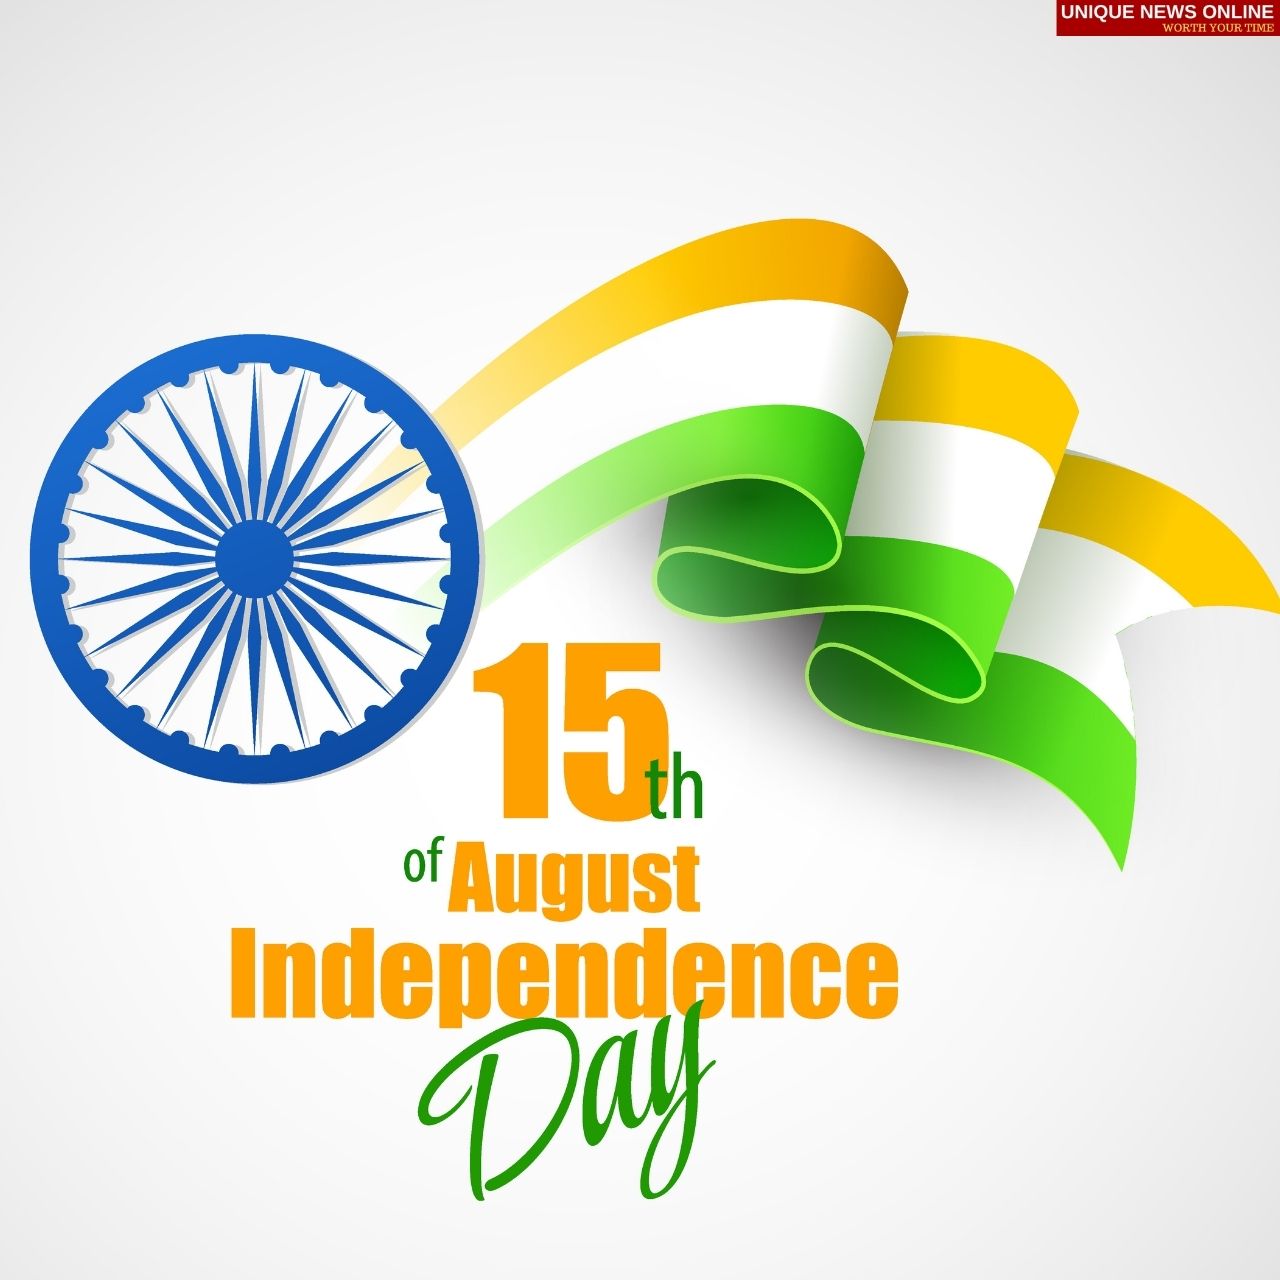 India Independence Day 2021 Quotes, Wishes, HD Images, Messages, Greetings, Slogans, Memes, Clipart, Status, Wallpaper, DP, and Poster to share with your Loved Ones